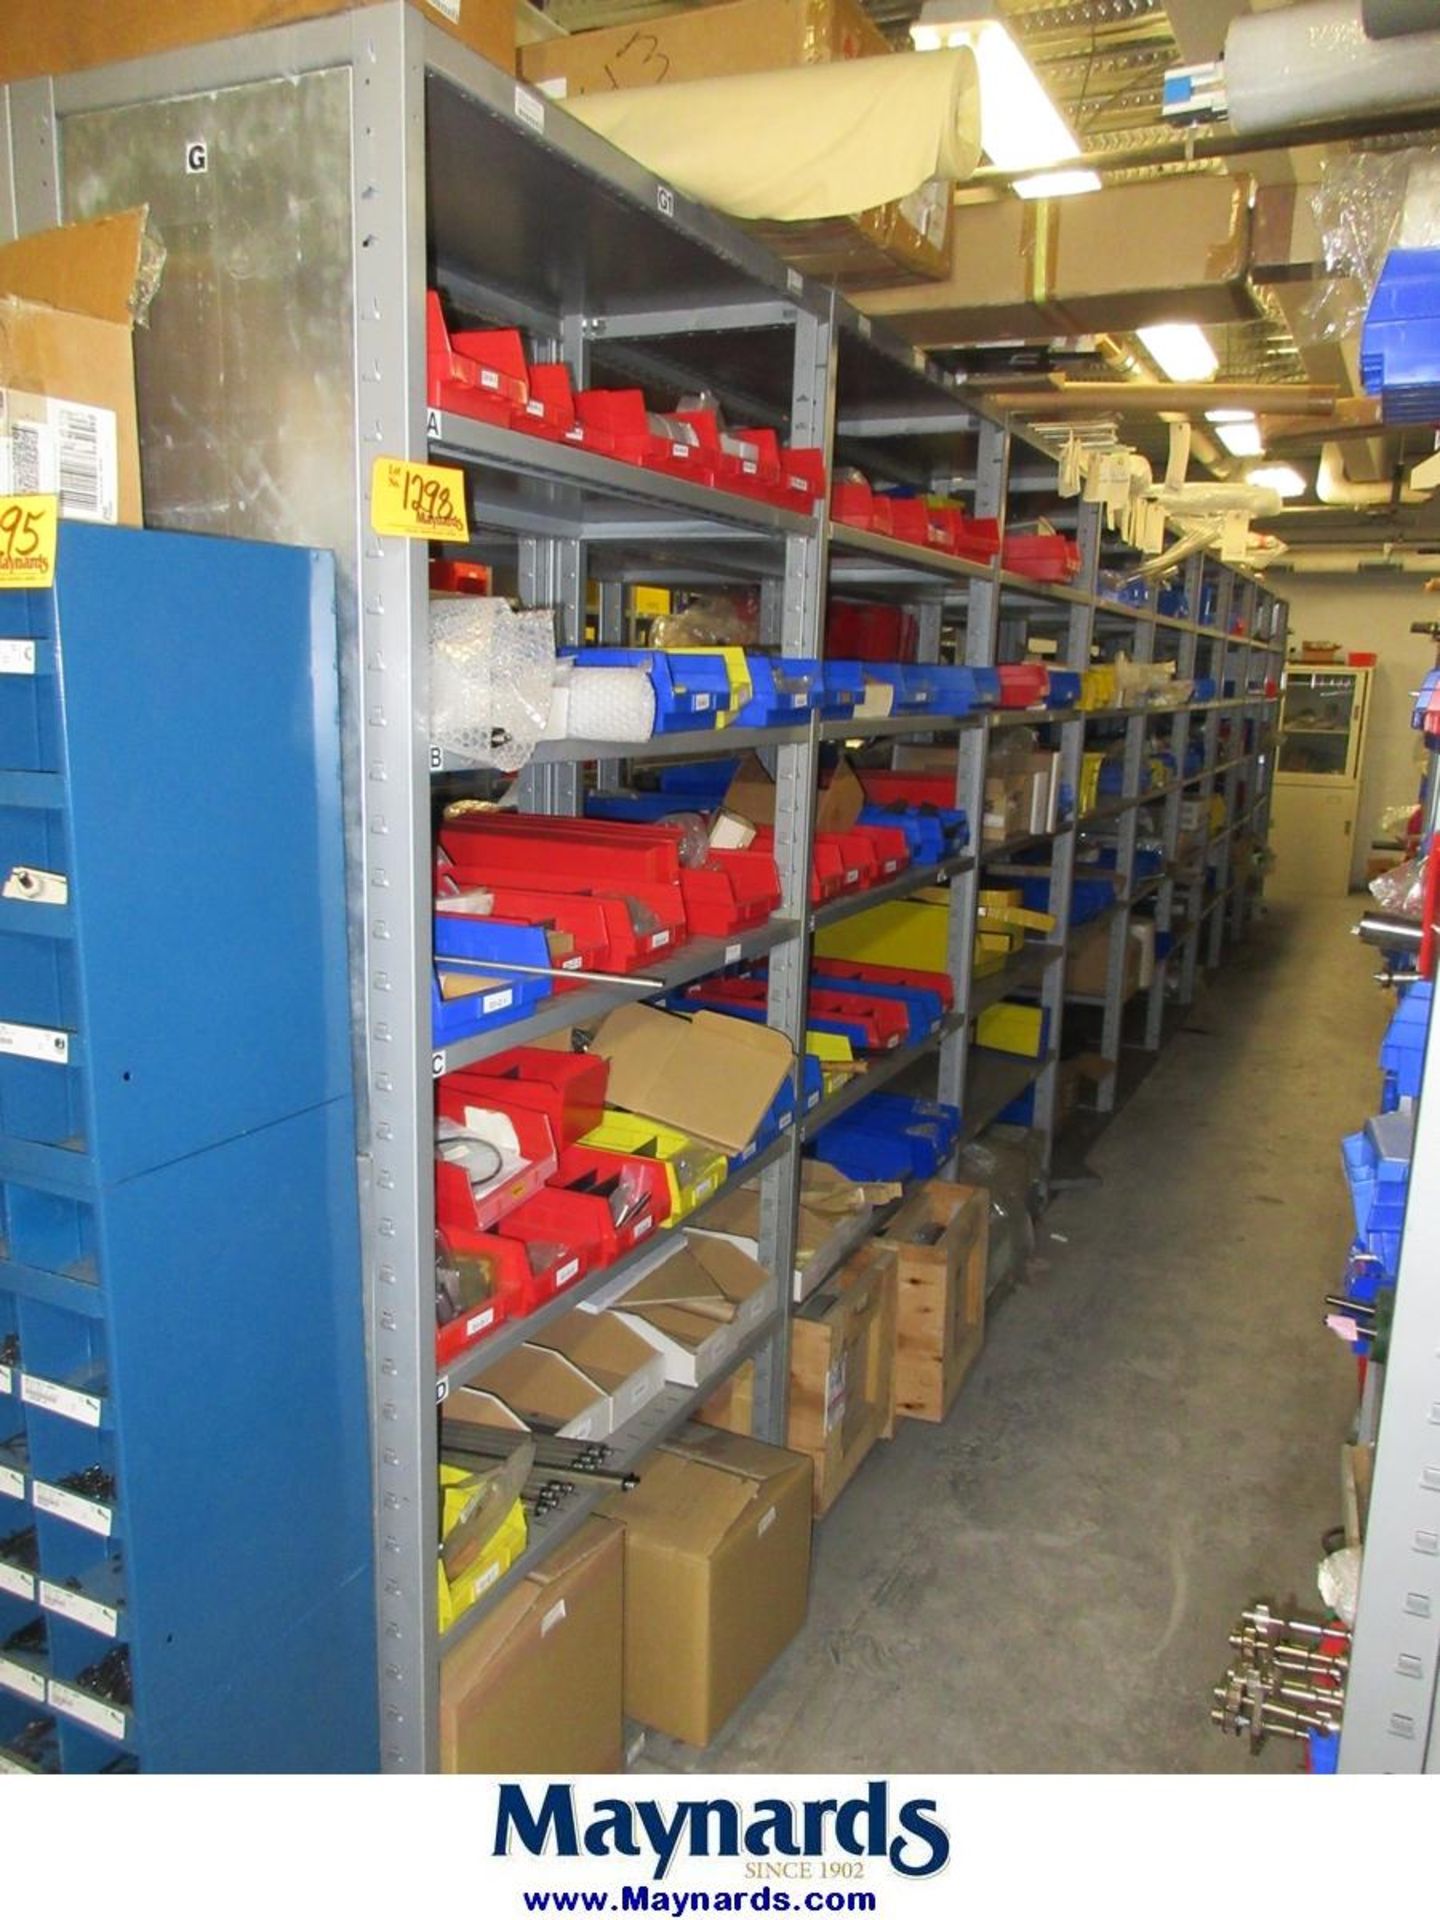 Large Lot of Electrical Controls, PLC's, Drives & Remaining Contents of Maint. Parts Crib - Image 60 of 107